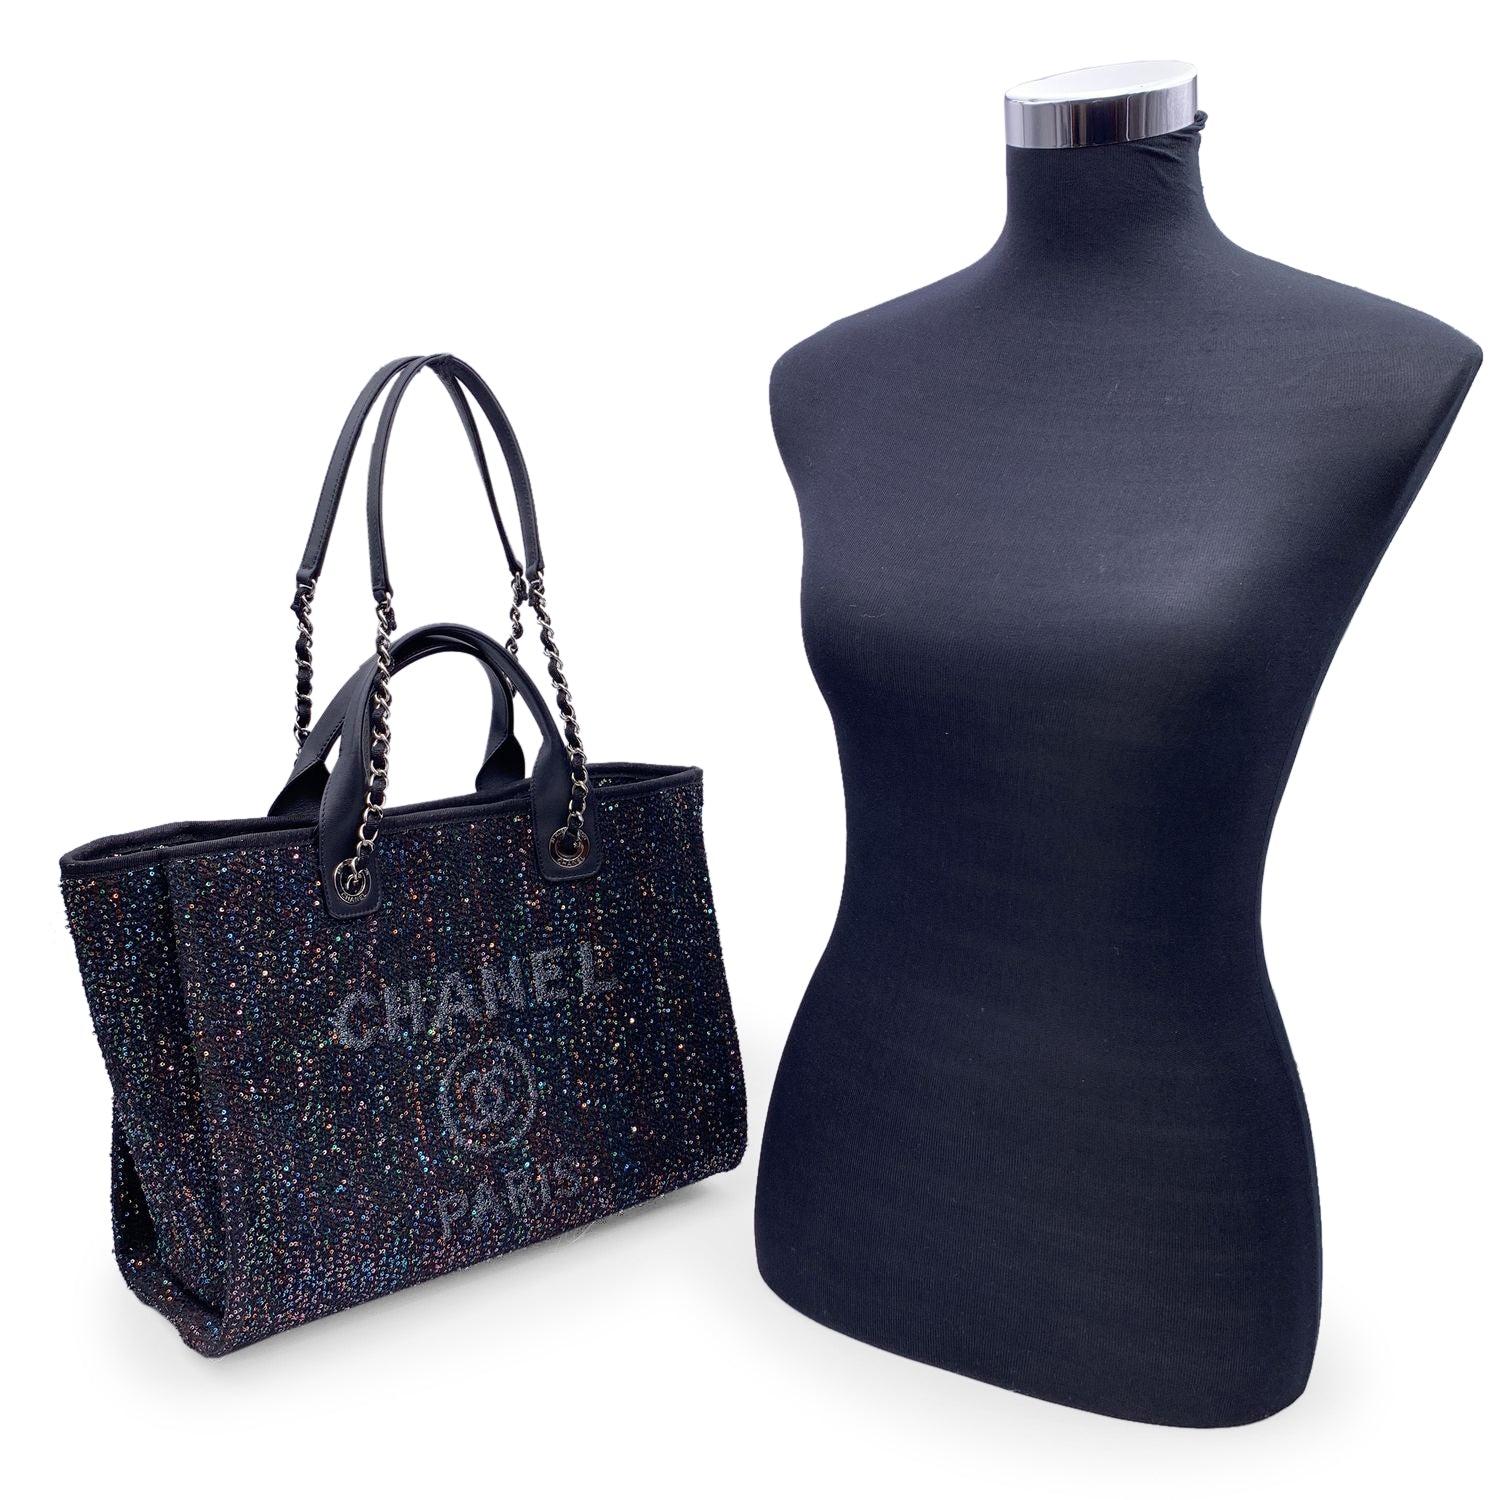 Beautiful Chanel 'Deauville' tote, crafted in black canvas with an embroidered 'Chanel CC Paris' logo and allover shimmering multicolored sequins. Period/Era: 2020. Double black leather top handles and silver metal and interwoven leather shoulder